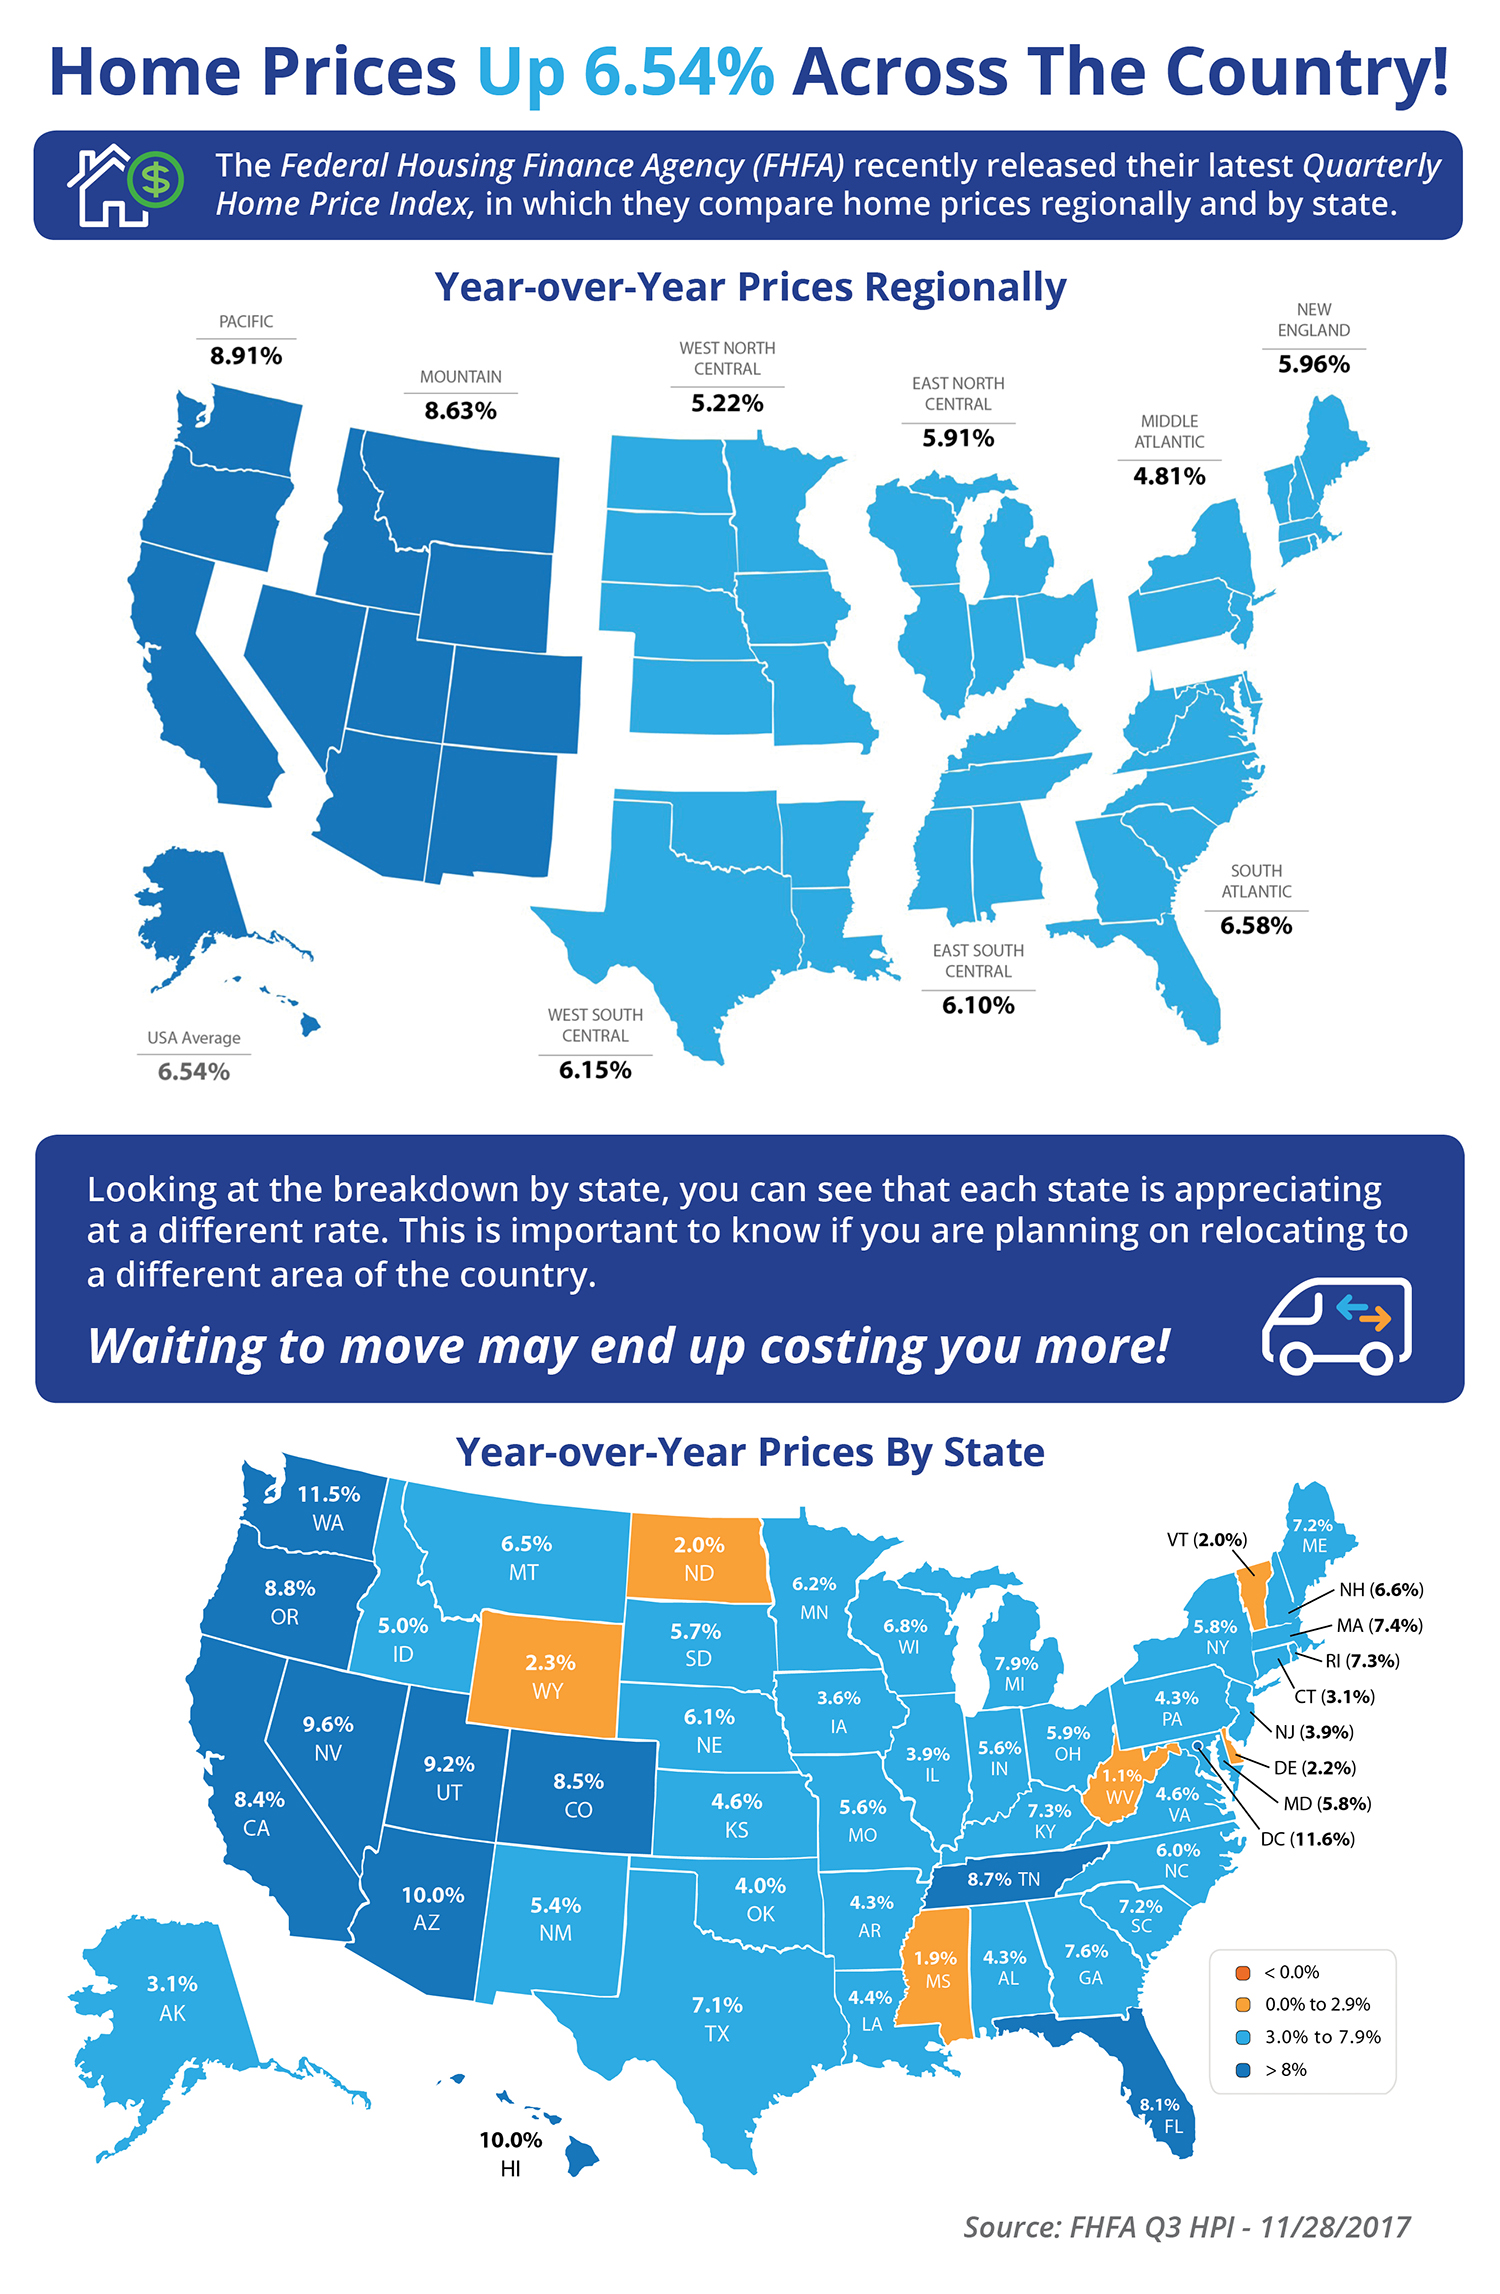 Home Prices Up 6.54% Across the Country! [INFOGRAPHIC] | Simplifying The Market